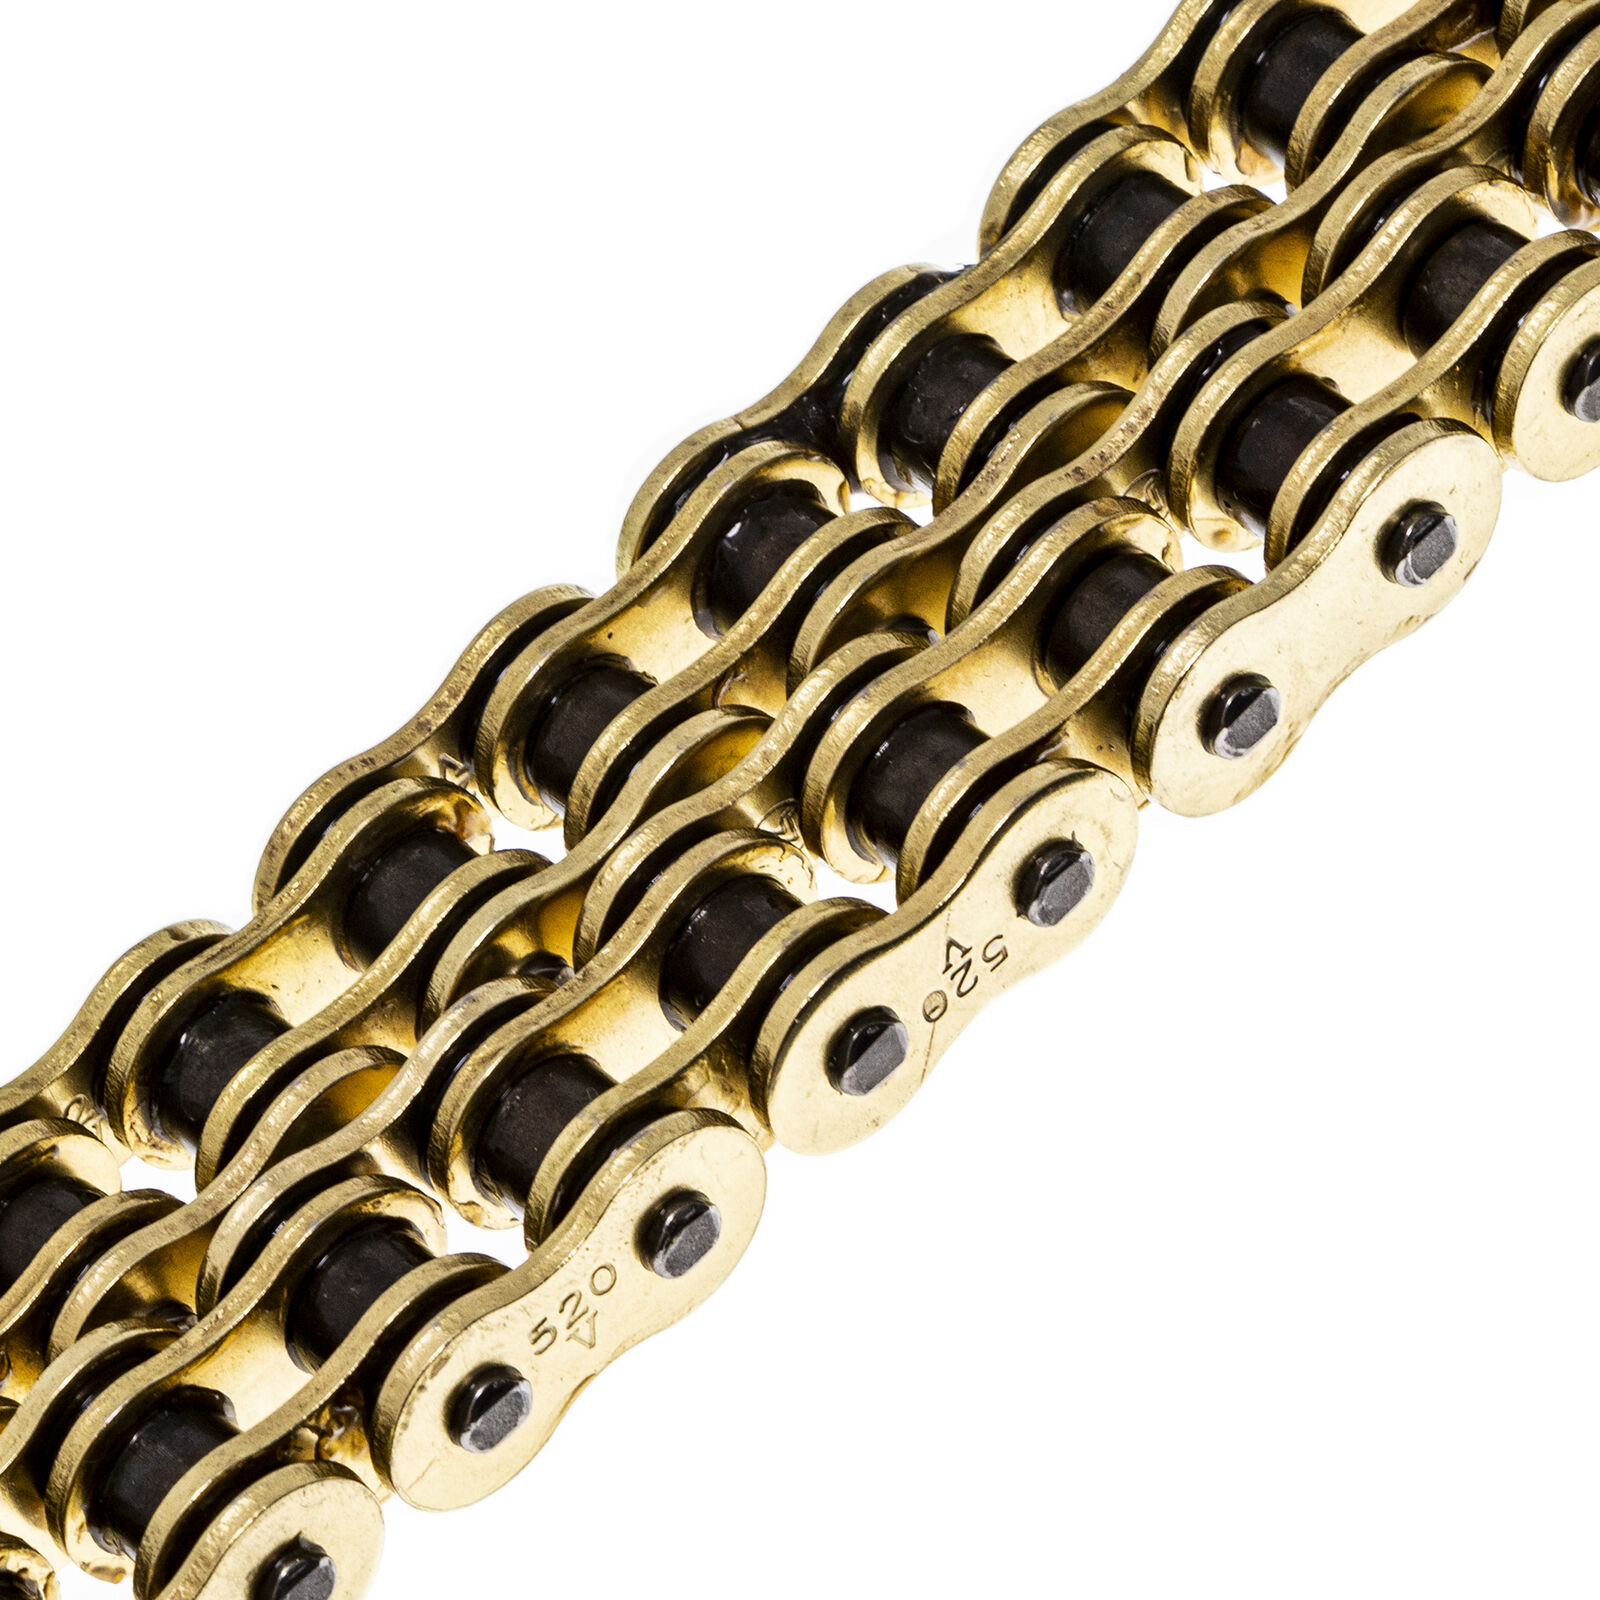 NICHE Gold 520 X-Ring Chain 118 Links With Connecting Master Link Motorcycle